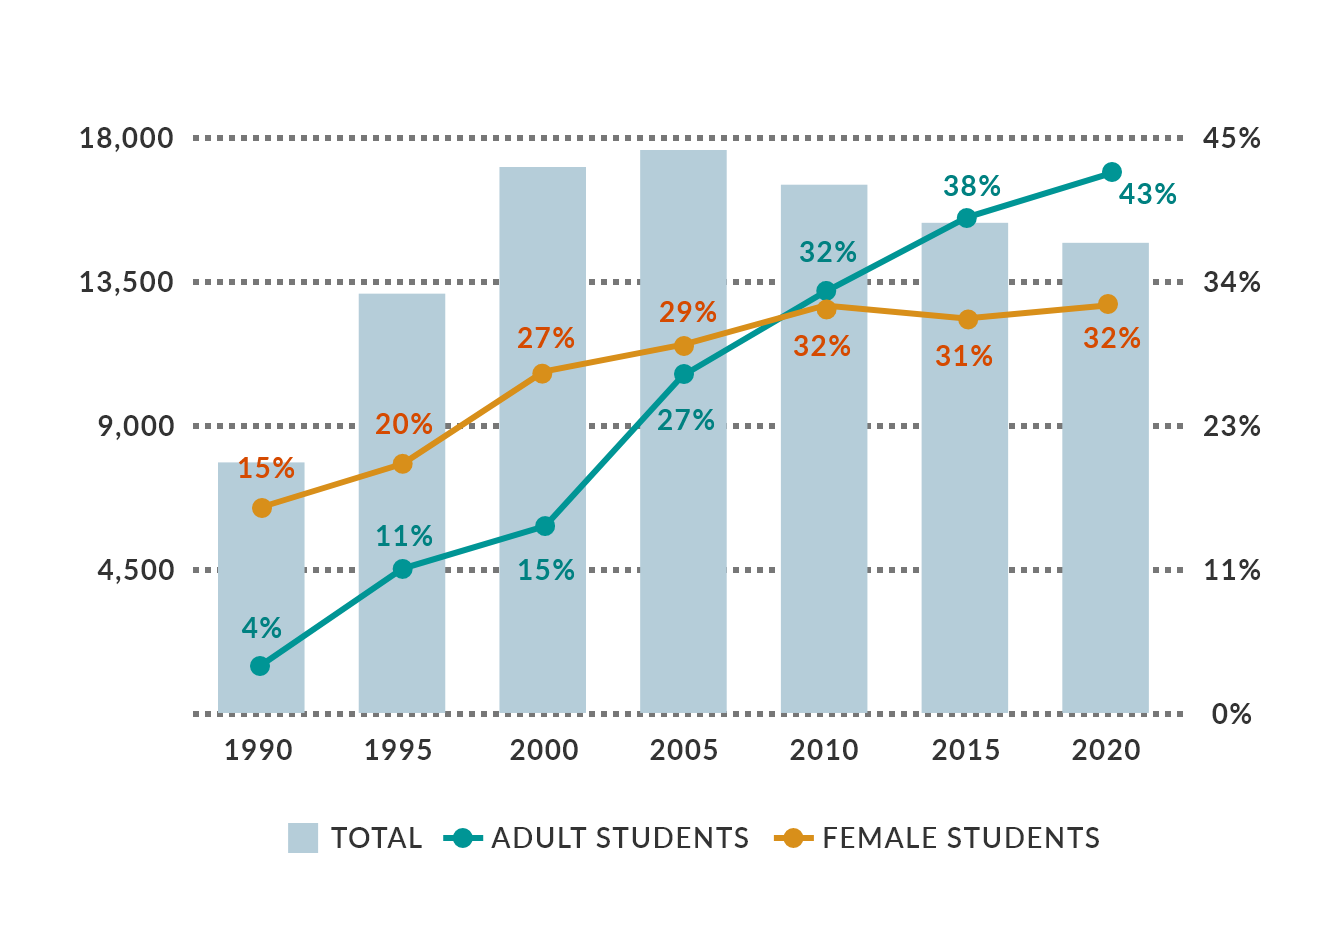 Trends in Doctoral Program Enrollment in Japan and Percentages of Working Adults and Women